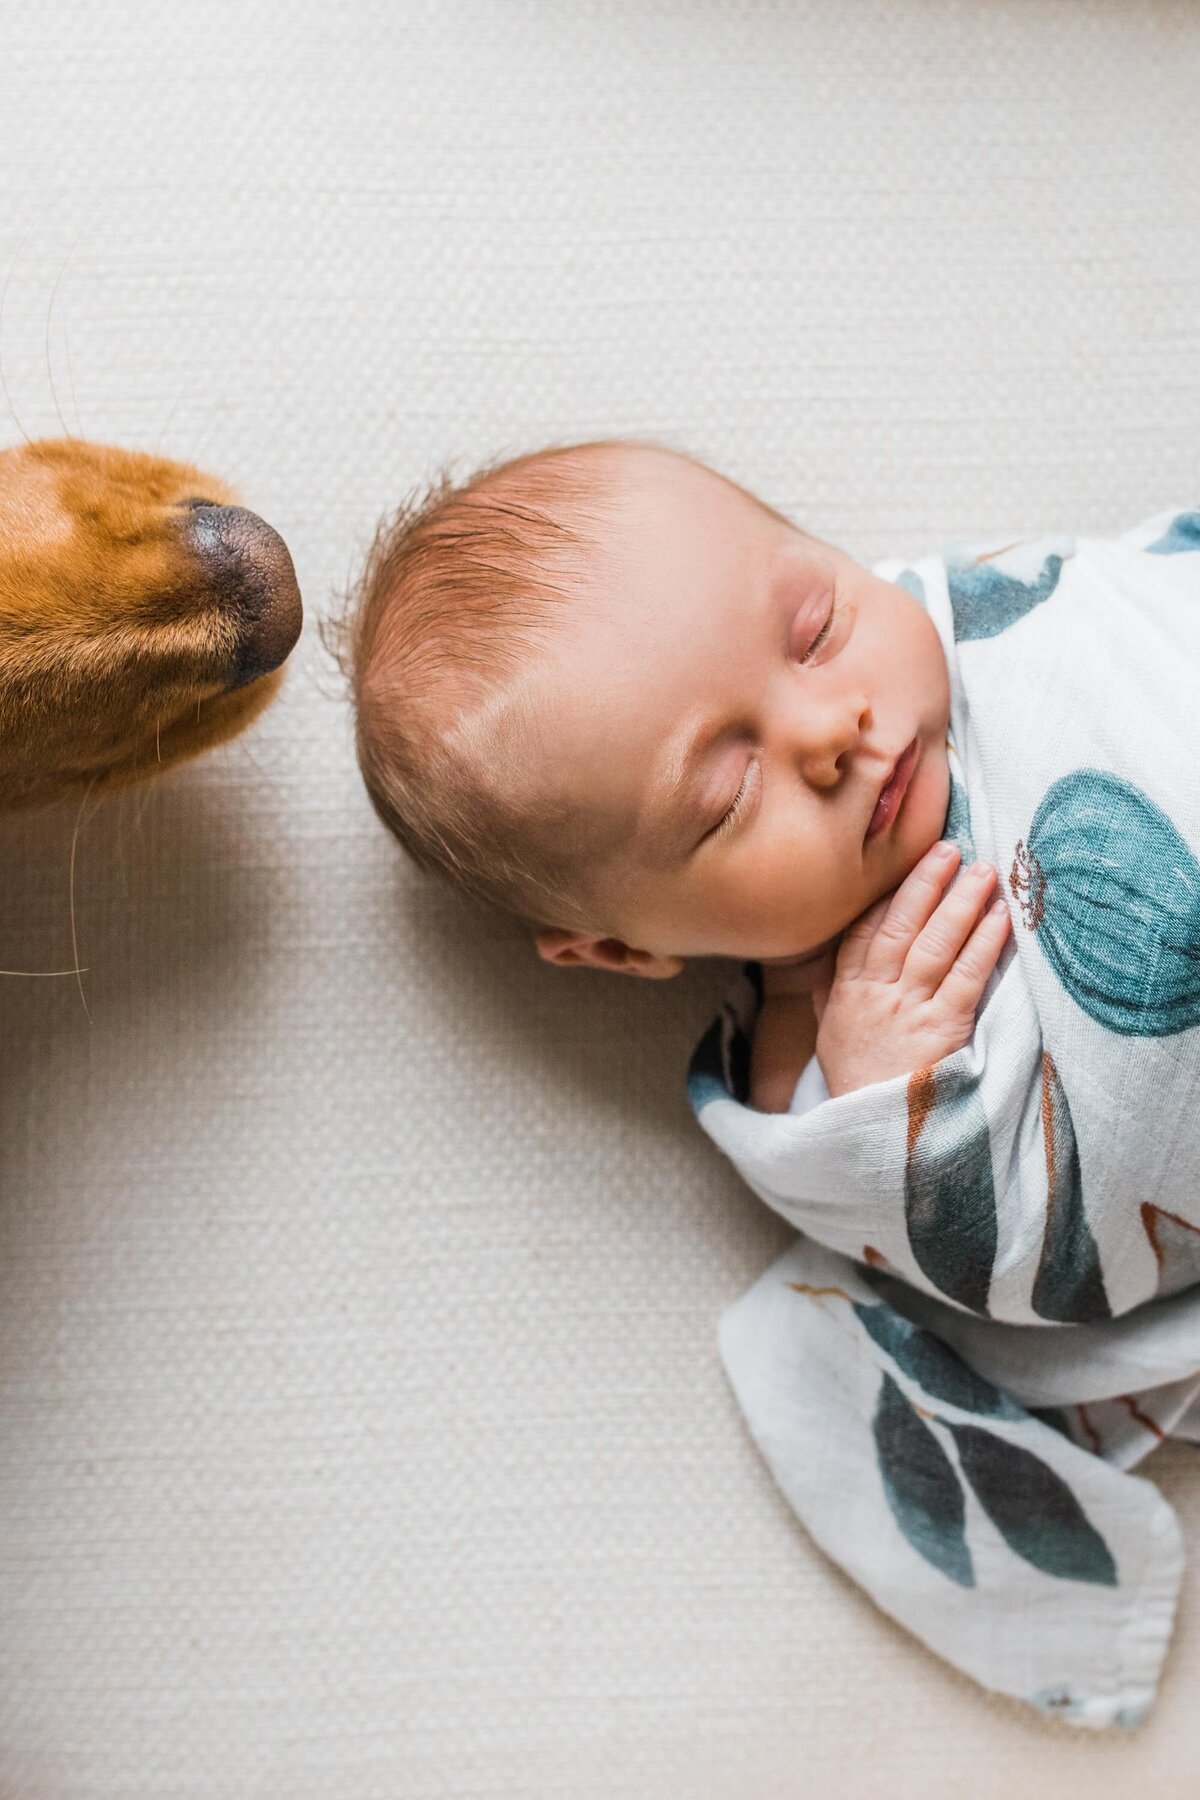 A sleeping infant swaddled in a patterned cloth, with a dog sniffing nearby, captured perfectly by a Pittsburgh family photographer.